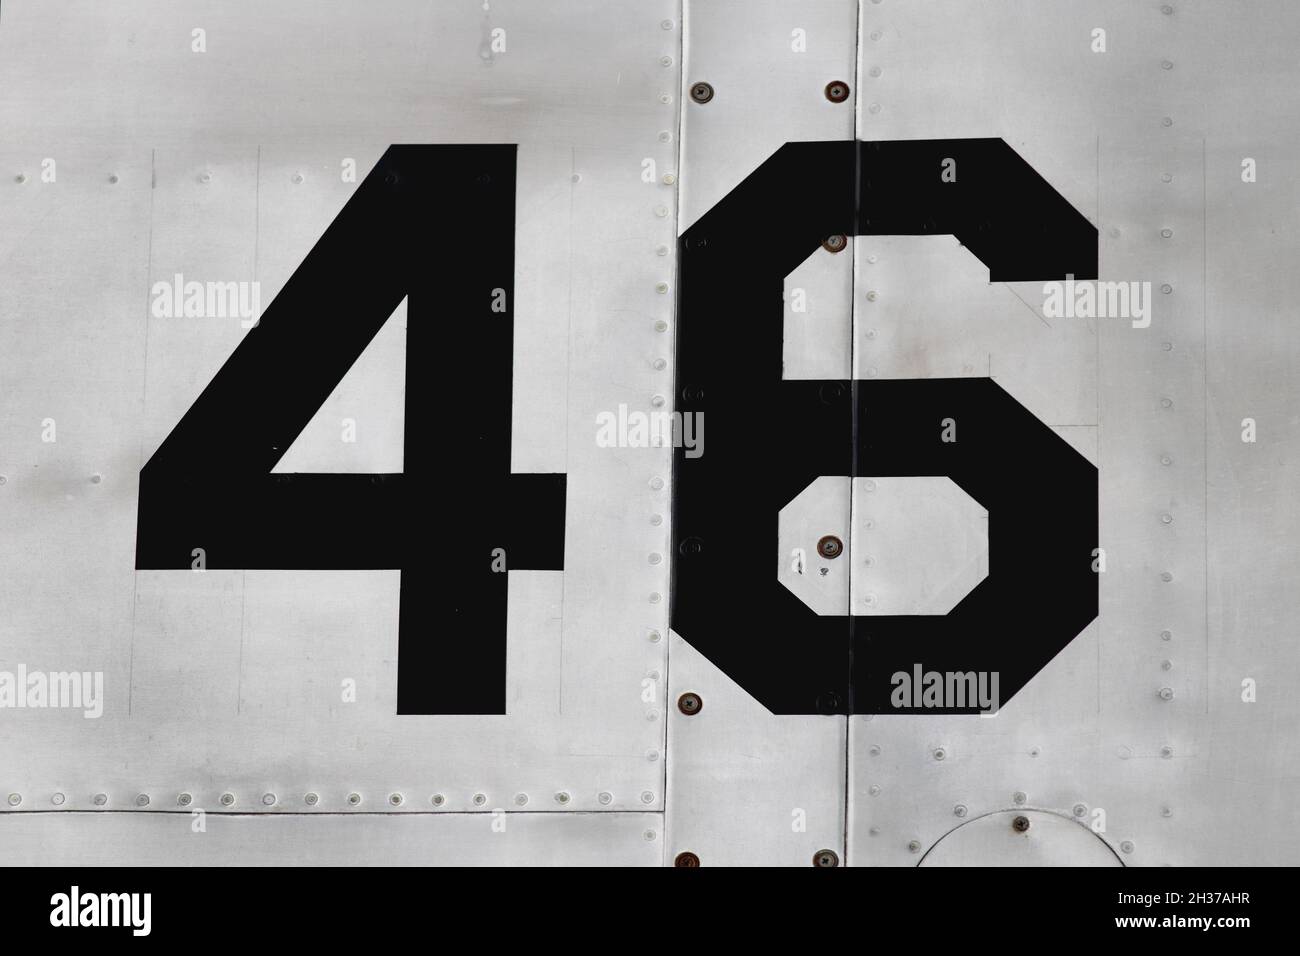 Number 46 on the side of the silver metallic fuselage of an aircraft Stock Photo